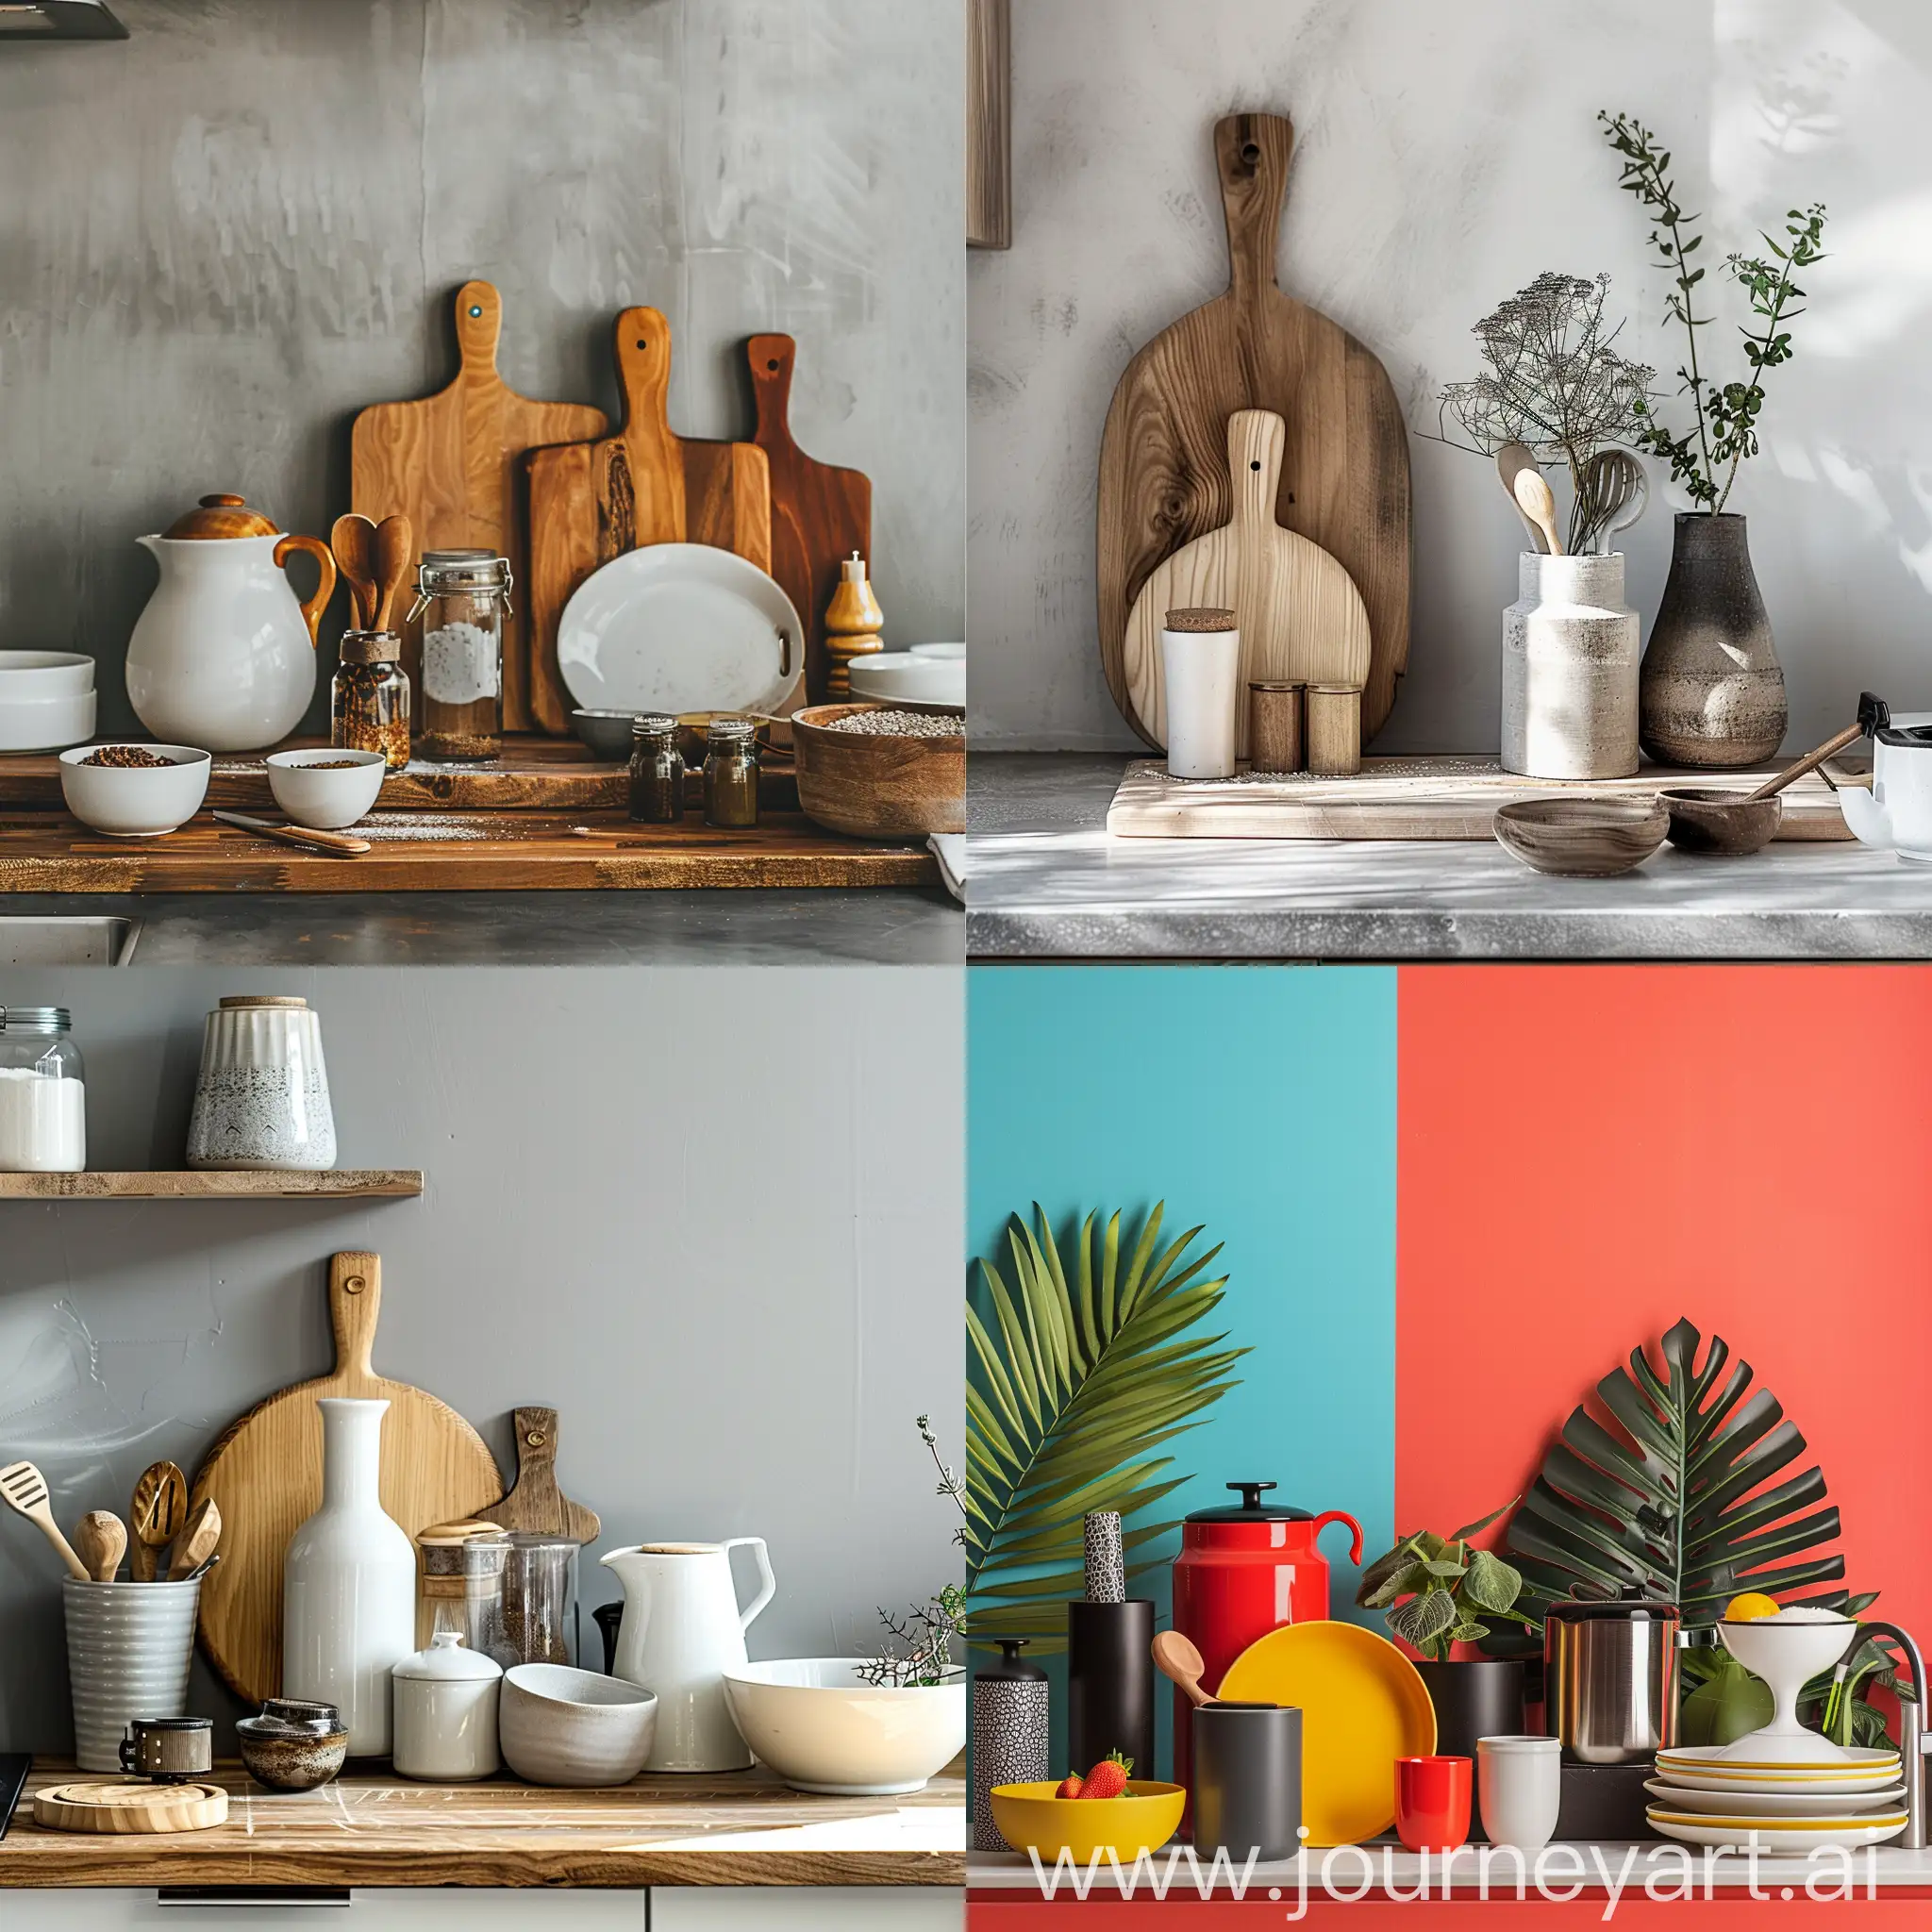 Kitchen-Products-Atmosphere-with-Vibrant-Colors-and-Symmetrical-Arrangement